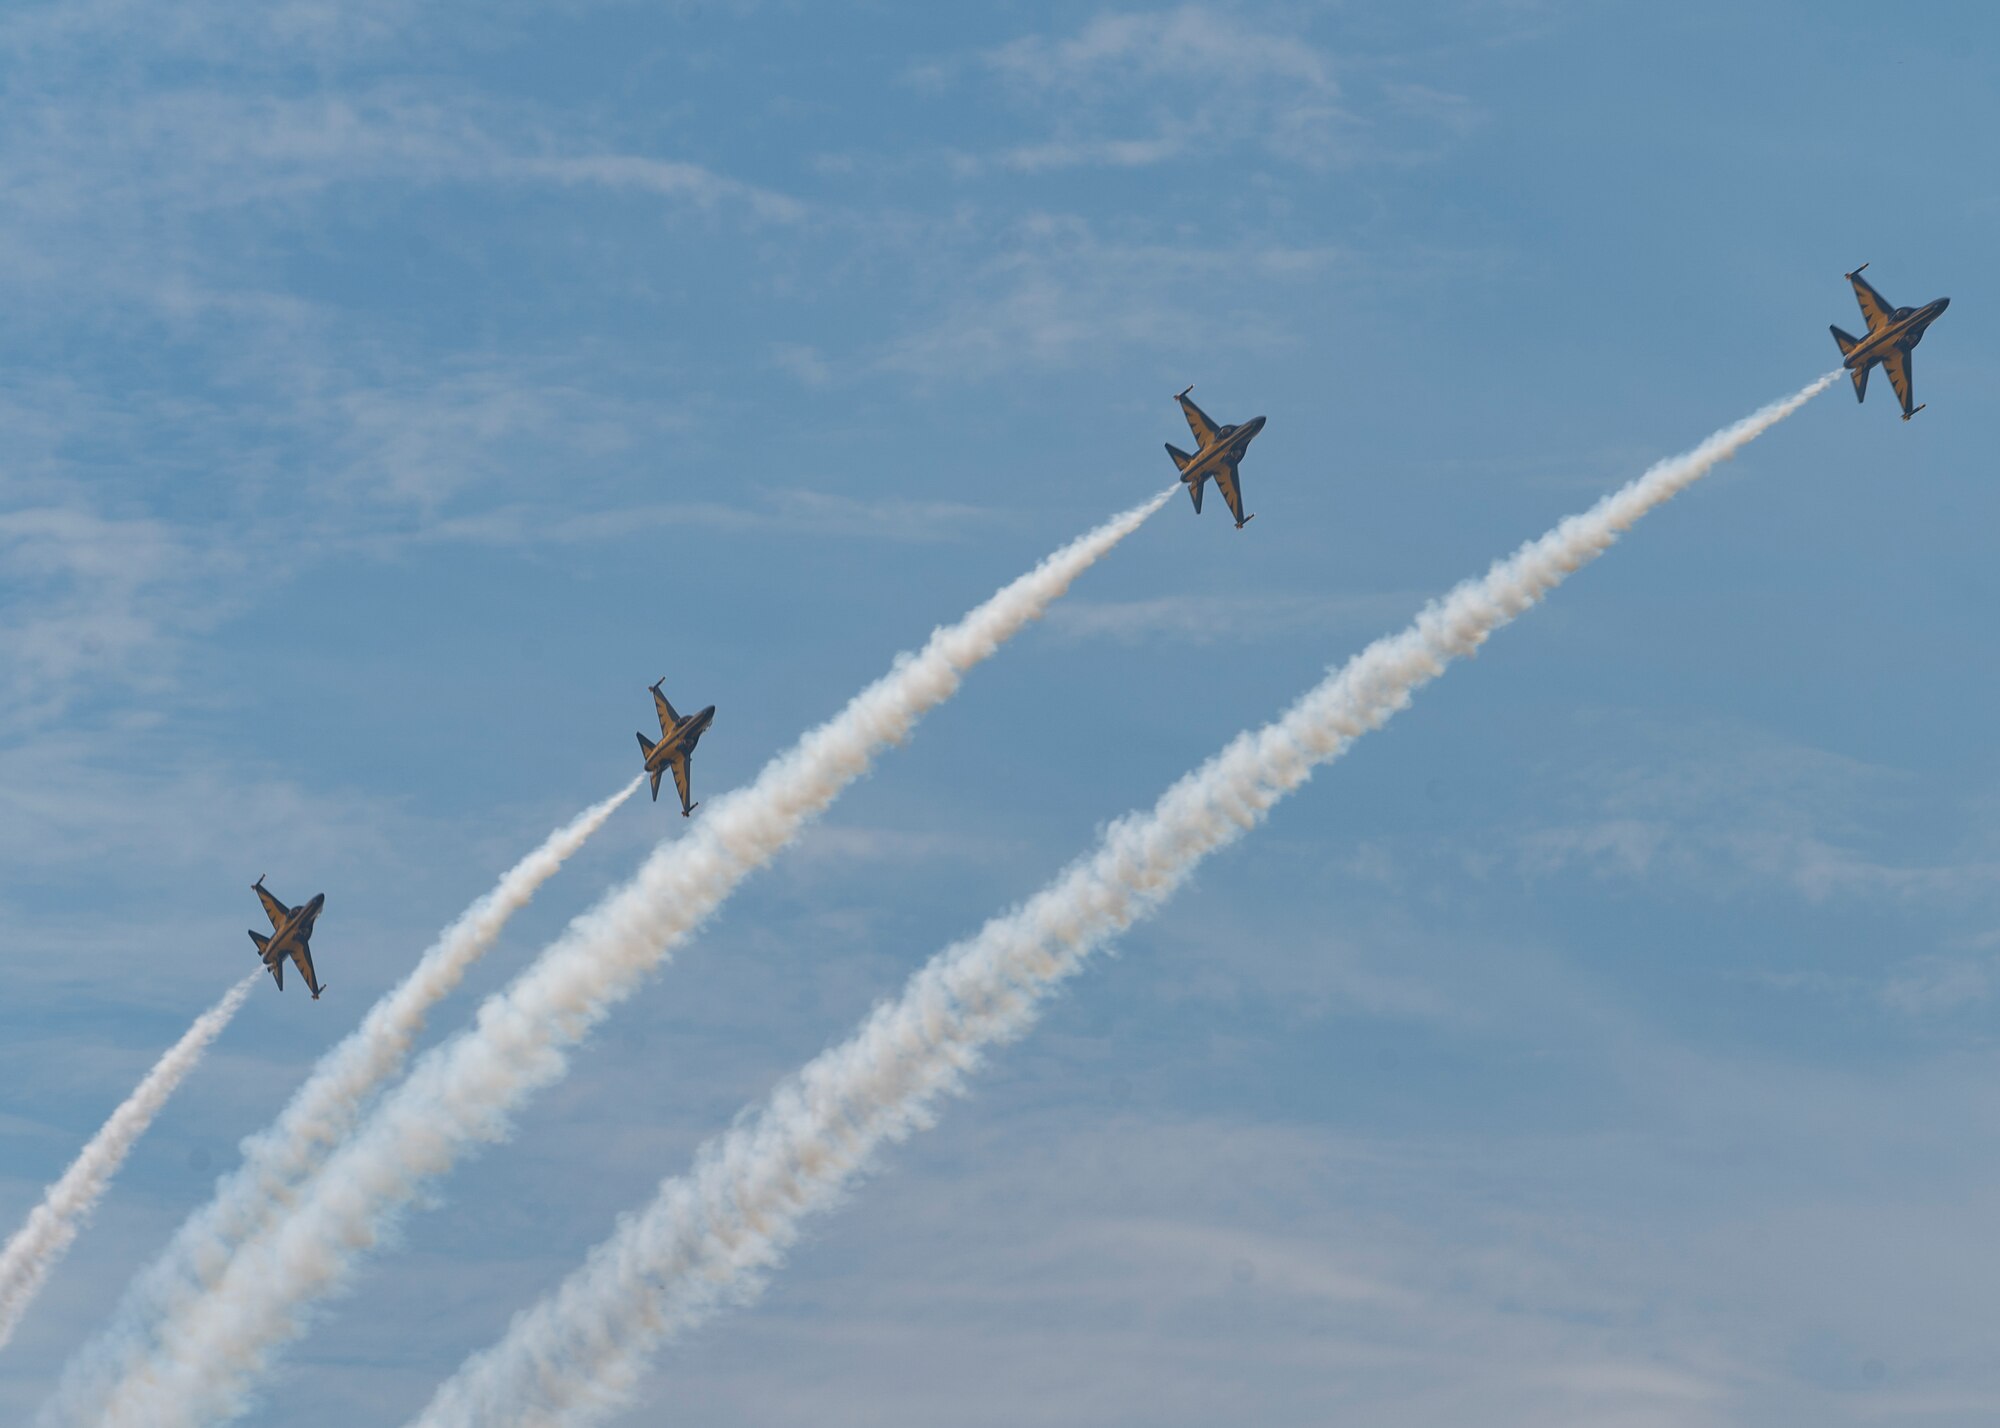 The Republic of Korea 53rd Air Demonstration Group, better known as the Black Eagles, perform an aerial tricks in the sky.